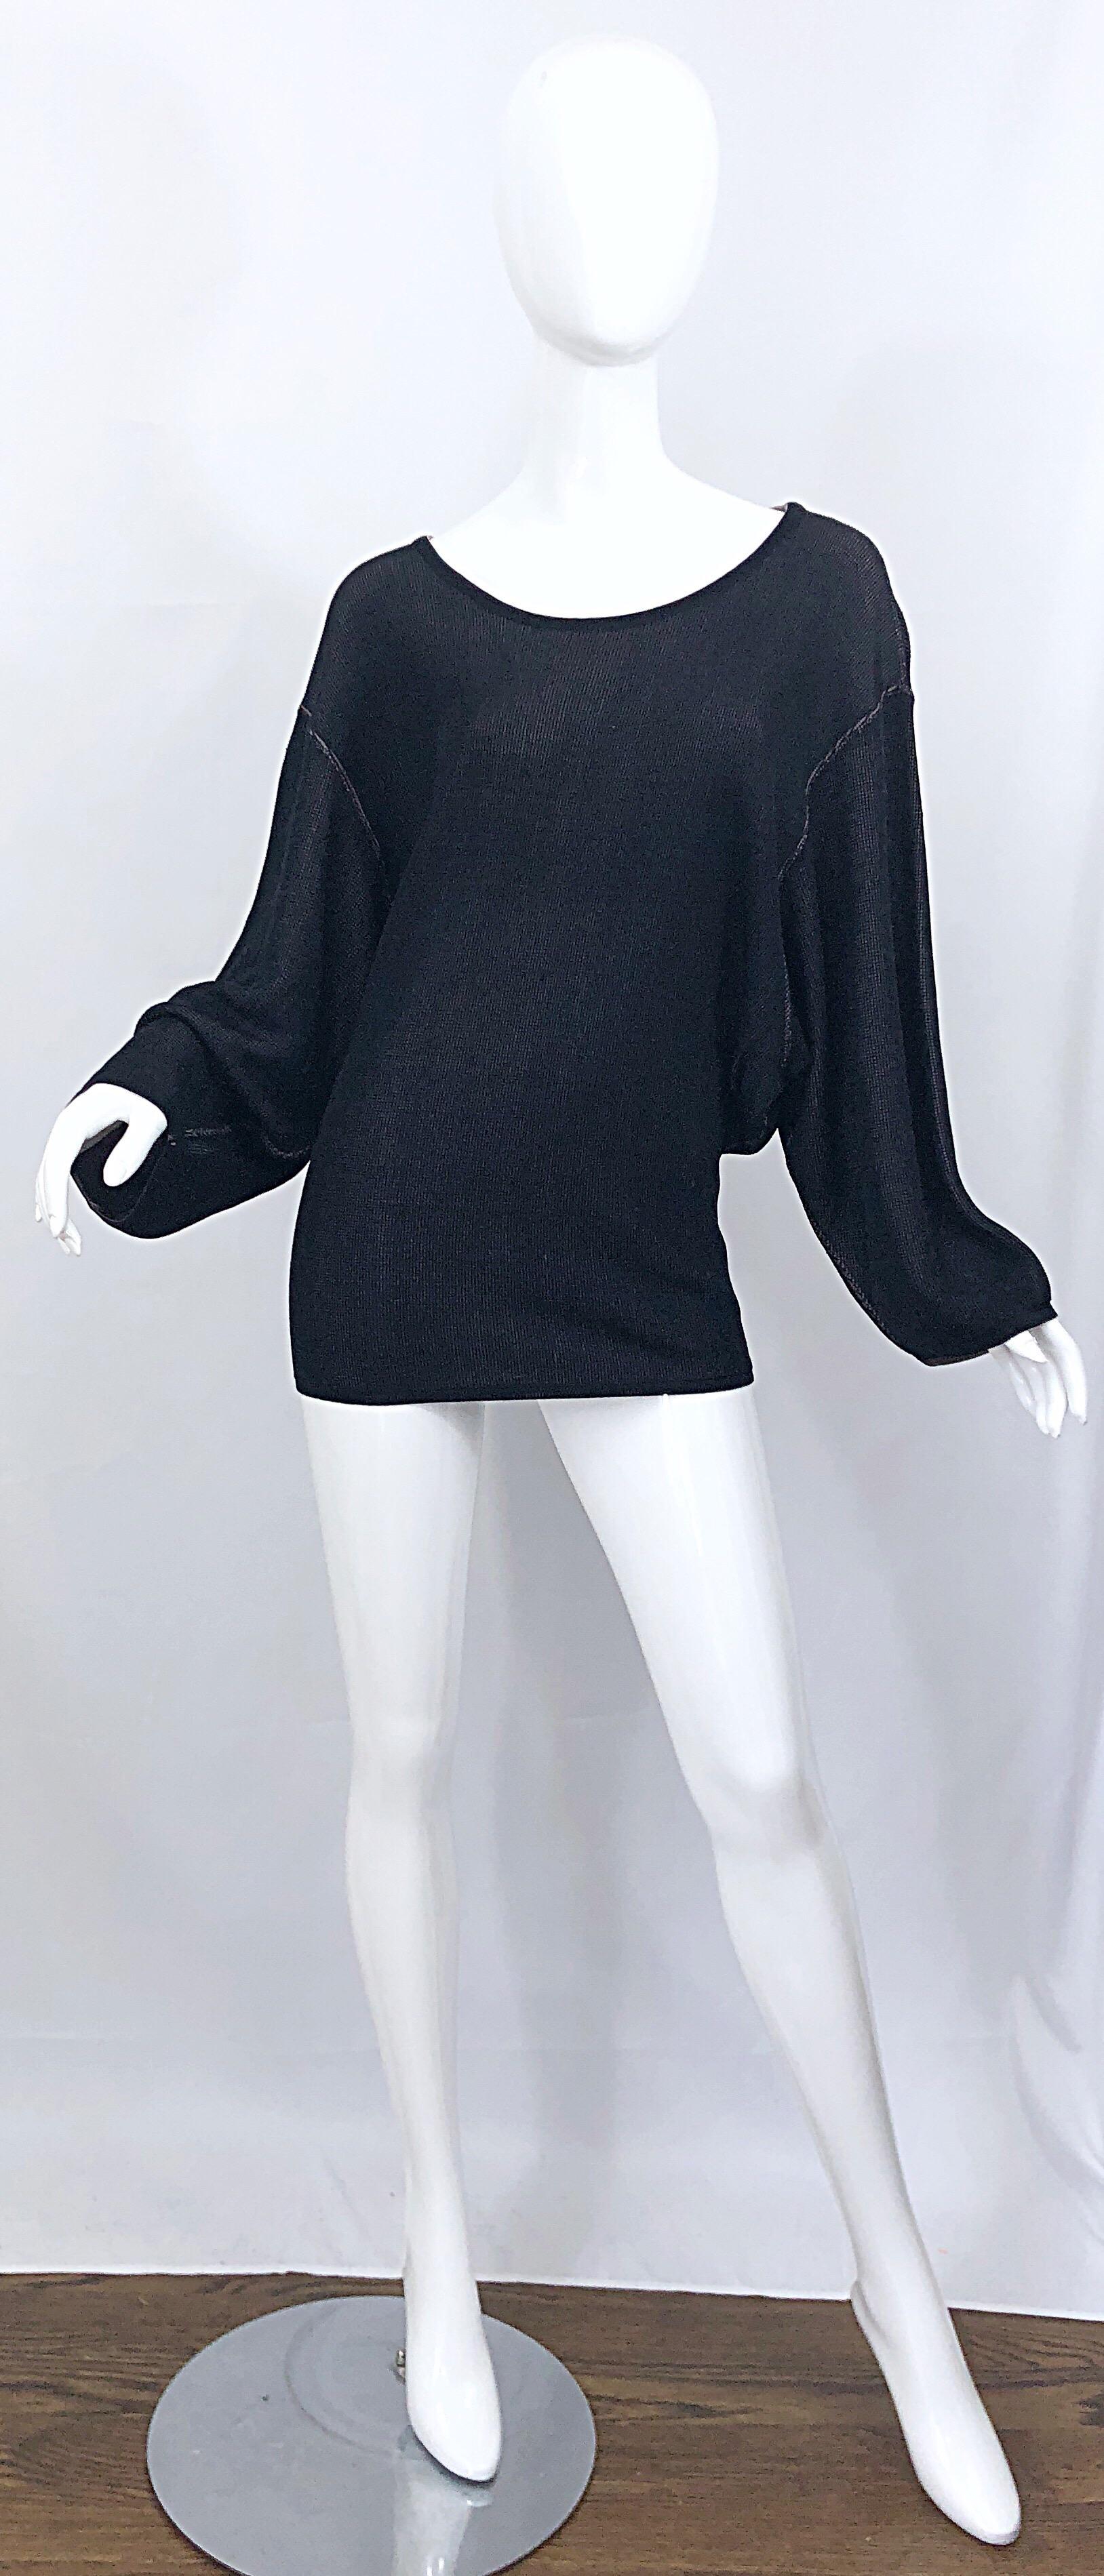 Sexy vintage 1980s AZZEDINE ALAIA black and nude viscose micro mini sweater dress / tunic! Features the most luxurious soft viscose rayon that drapes the body so beautifully. Dolman sleeves will accomodate an array of bust sizes, and skirt is meant